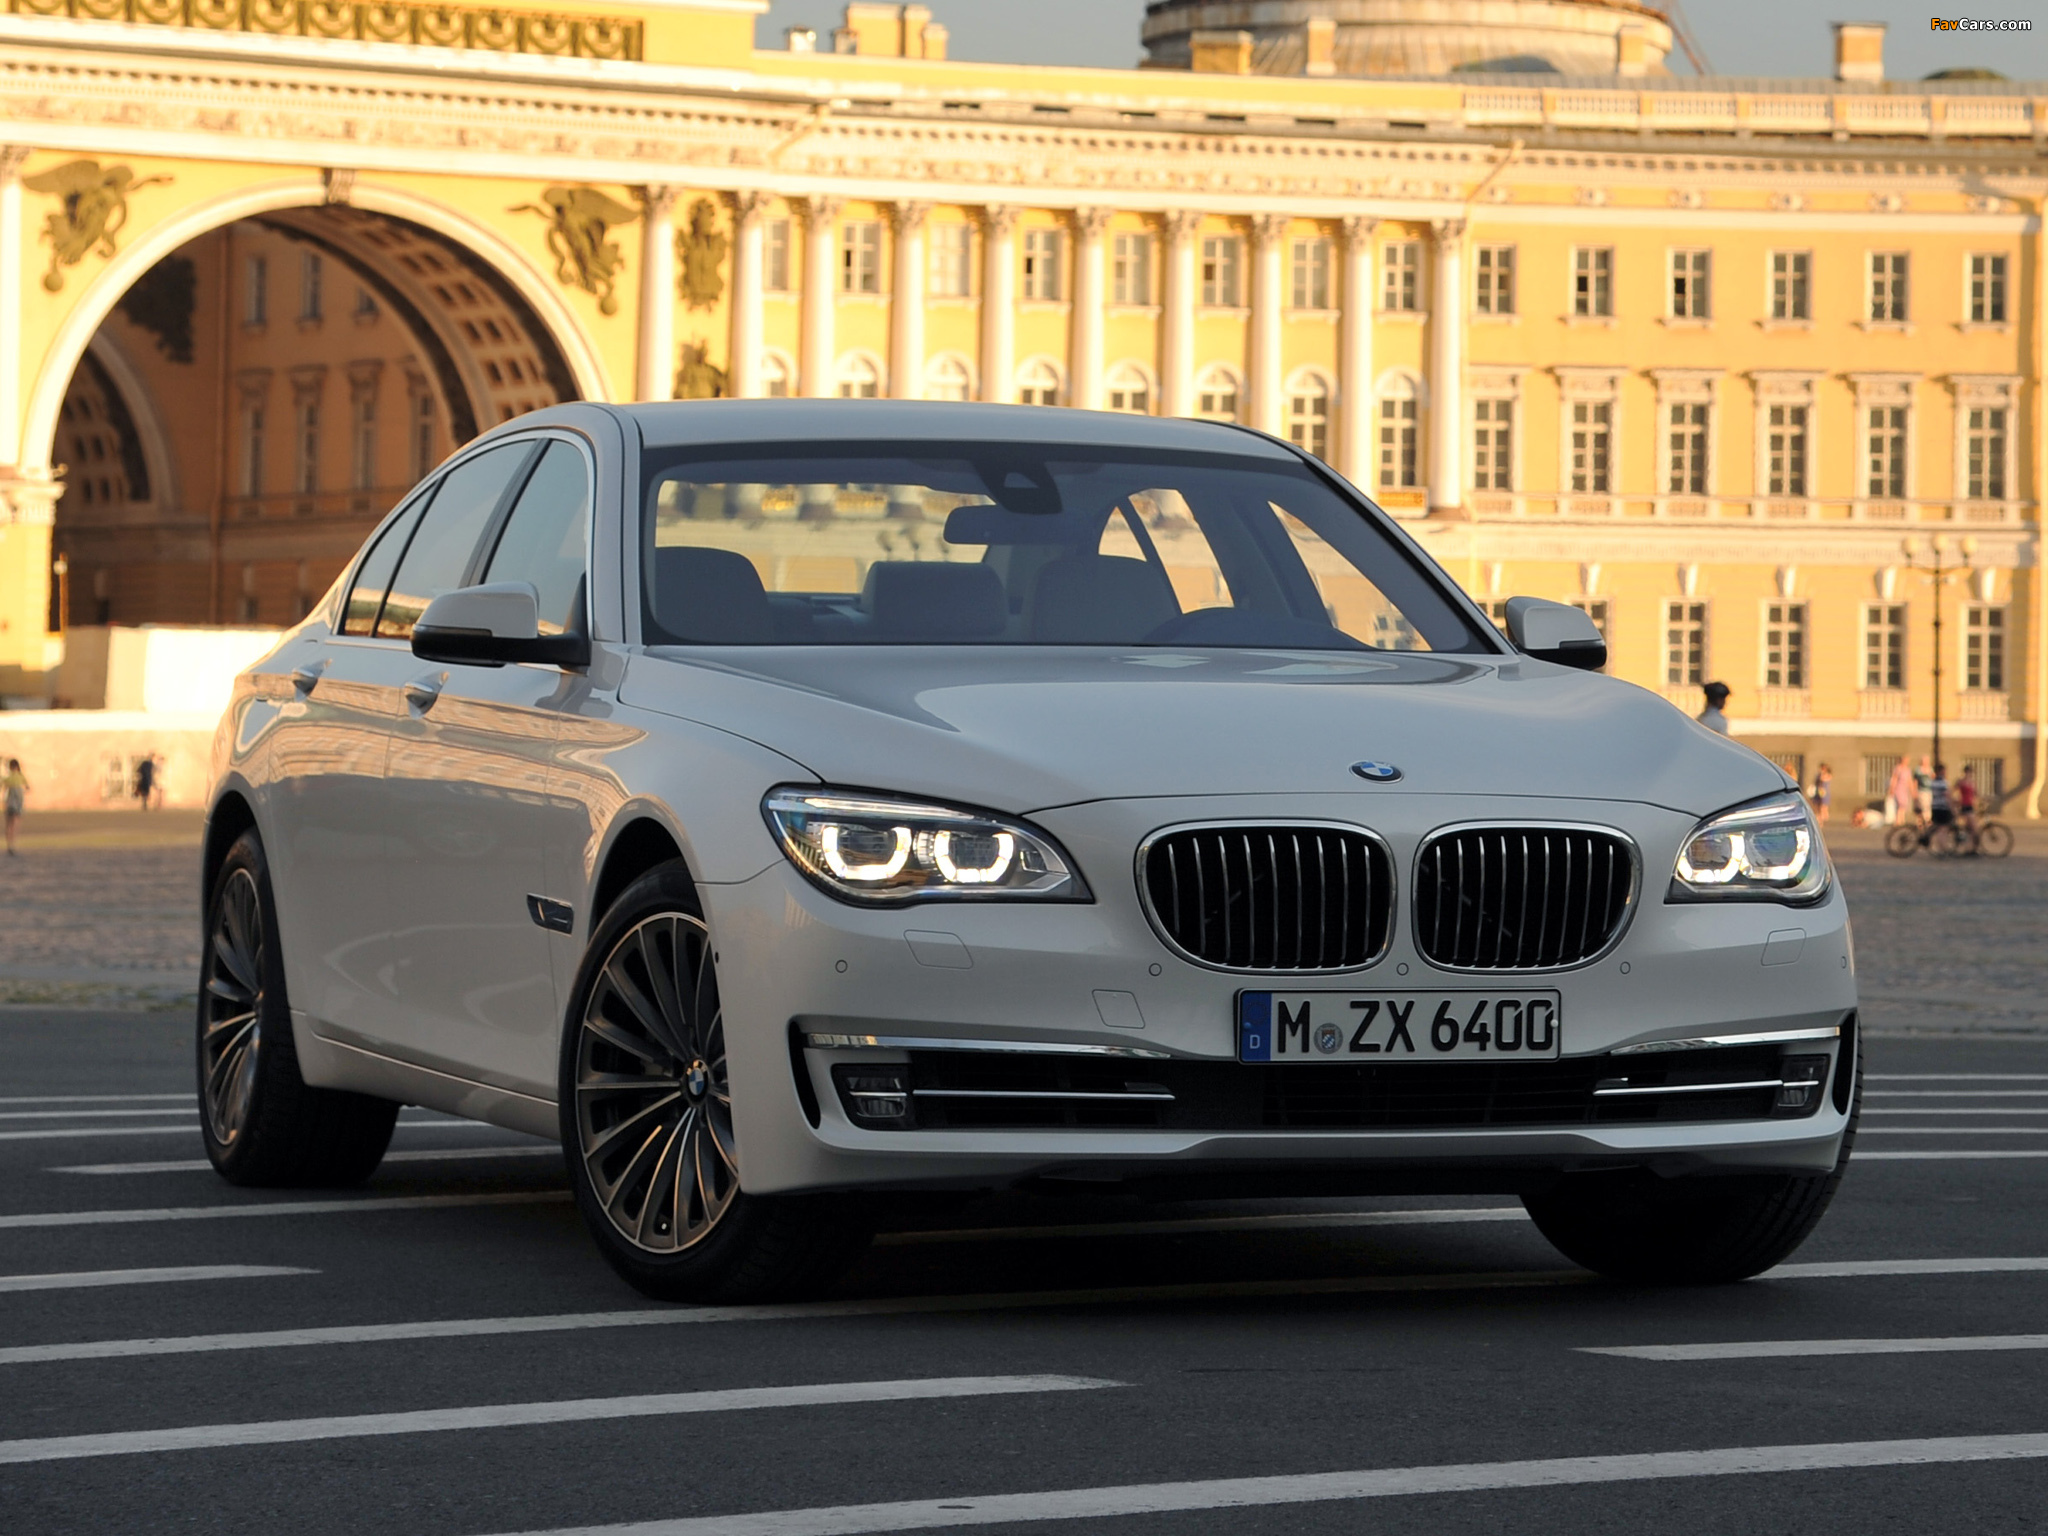 BMW 750i (F01) 2012 pictures (2048 x 1536)